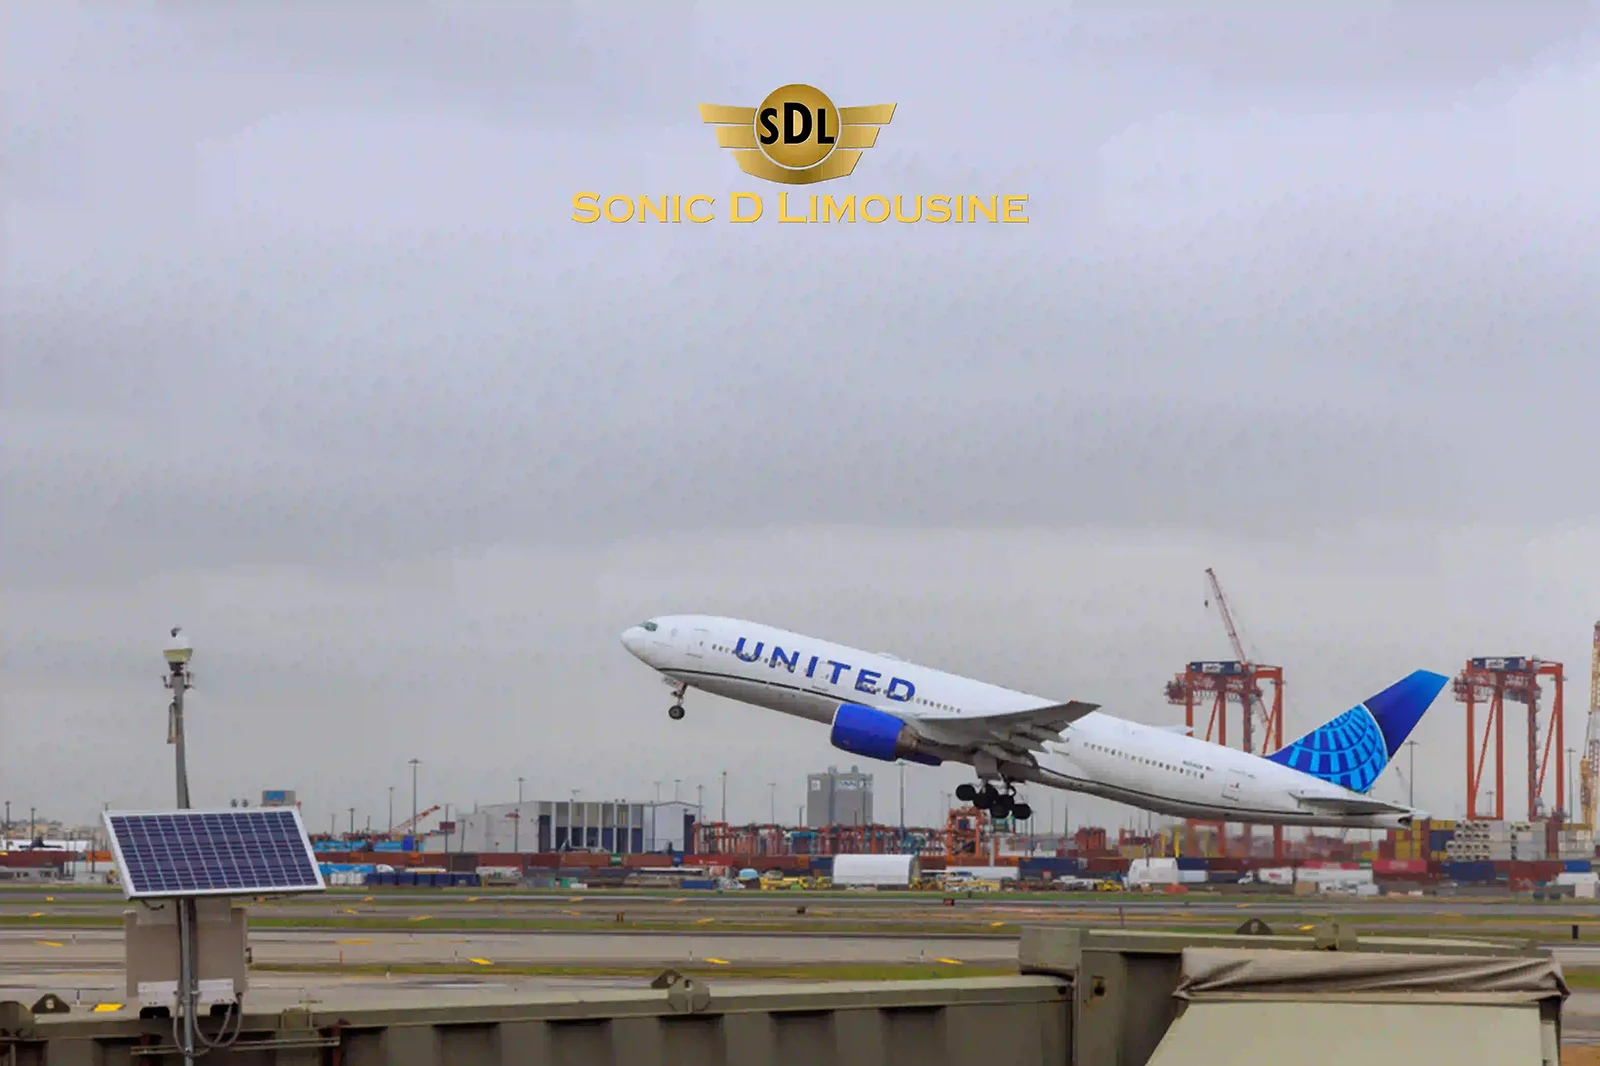 Sonic D Limousine A plane is taking off from an airport.